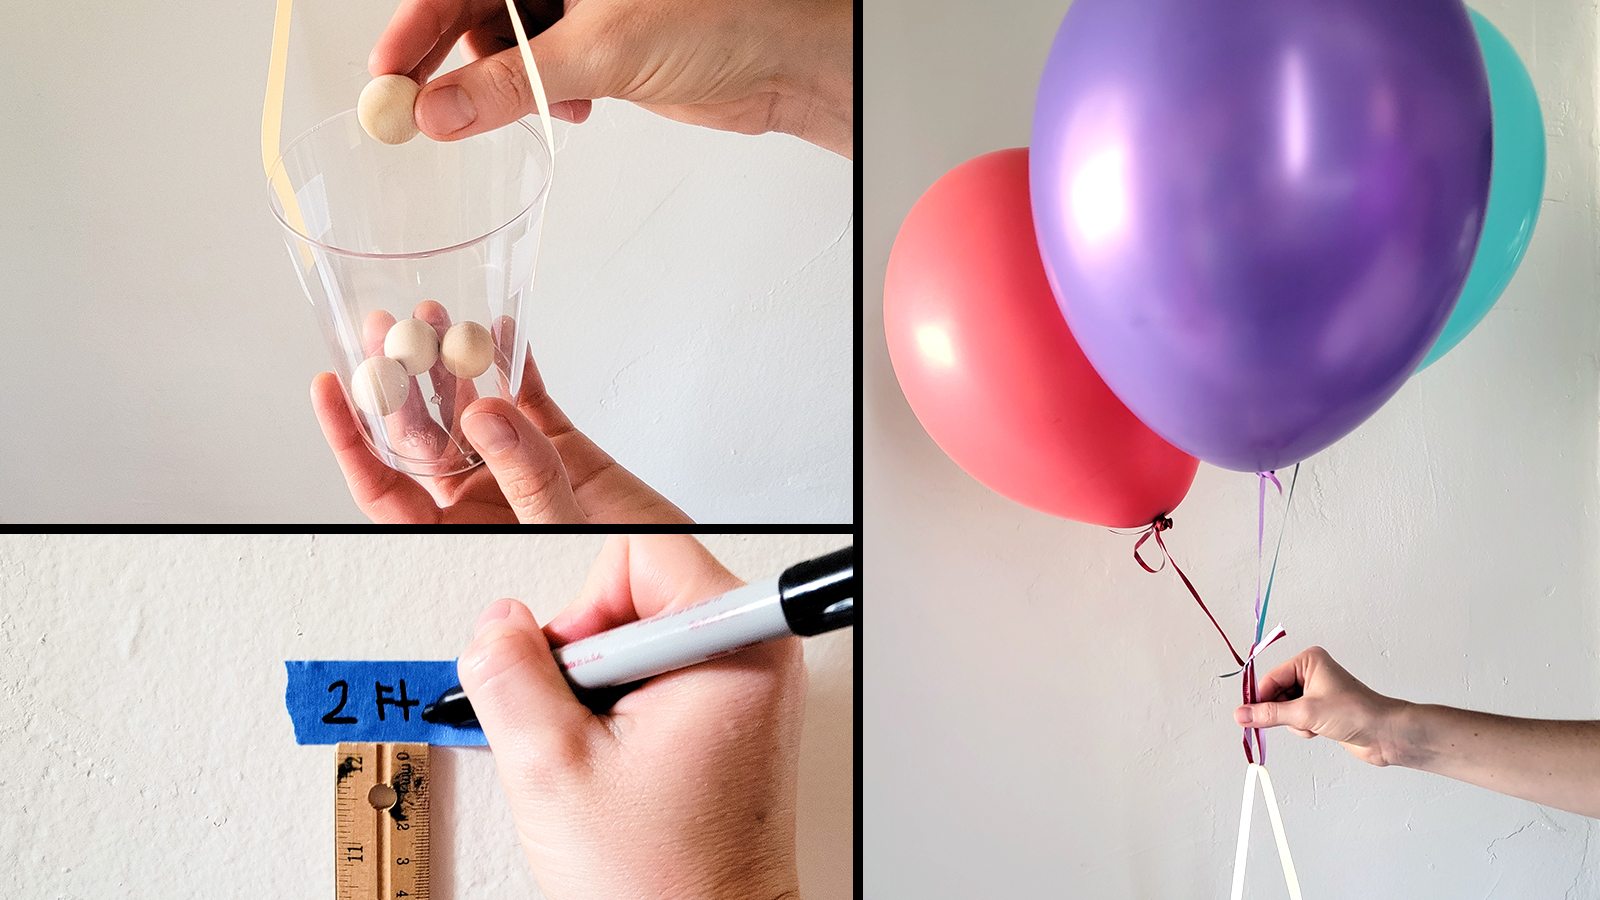 A collage of images shows a person dropping a wooden bead into a cup, writing a measurement on painters tape stuck to the wall, and holding their balloon and gondola system in preparation for launch.